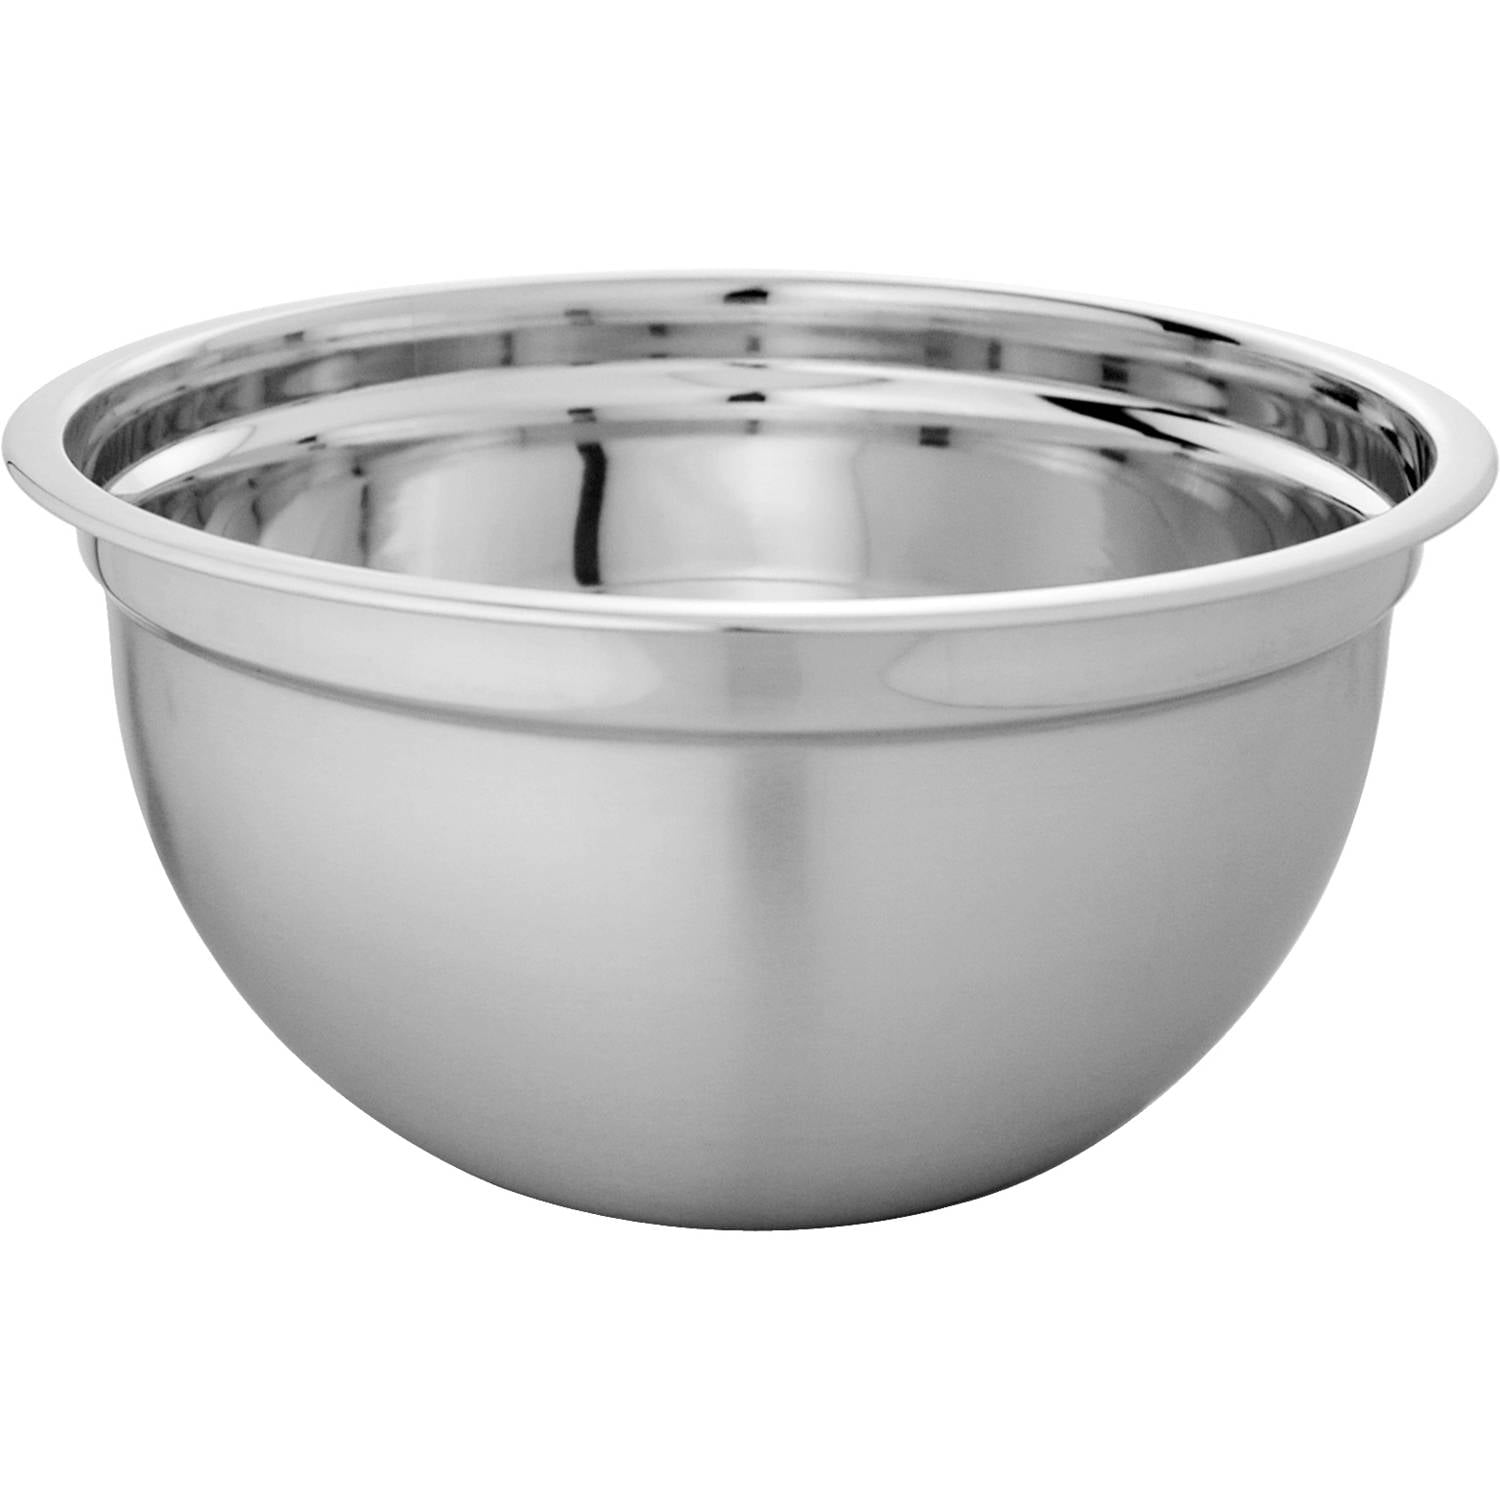 Mainstays SS 8QT Multi-Use Mixing Bowl for Prepping, Serving or